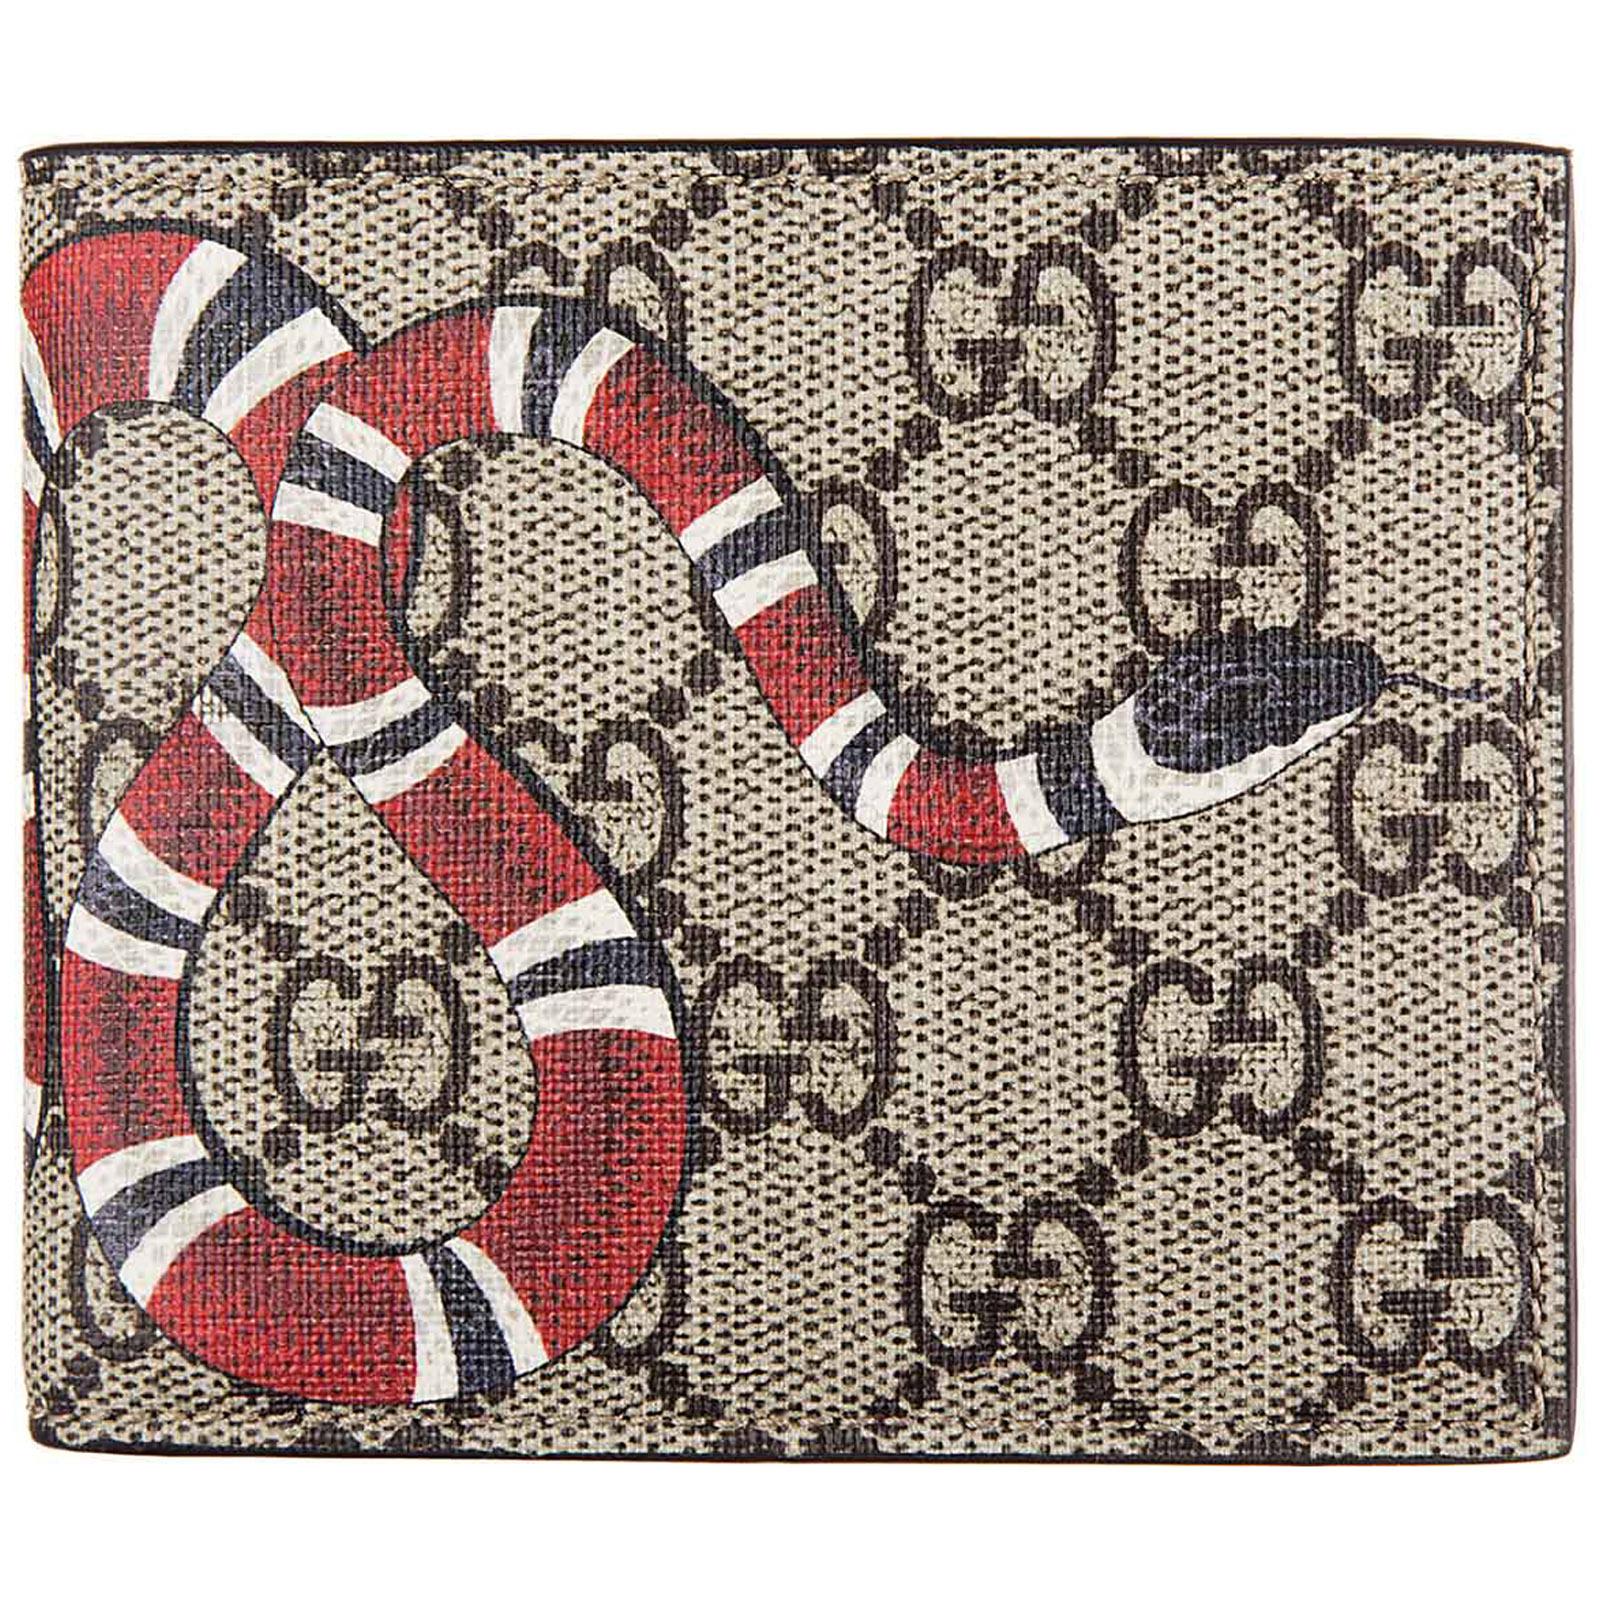 Gucci Canvas Genuine Leather Wallet Credit Card Bifold gg Supreme for Men - Lyst